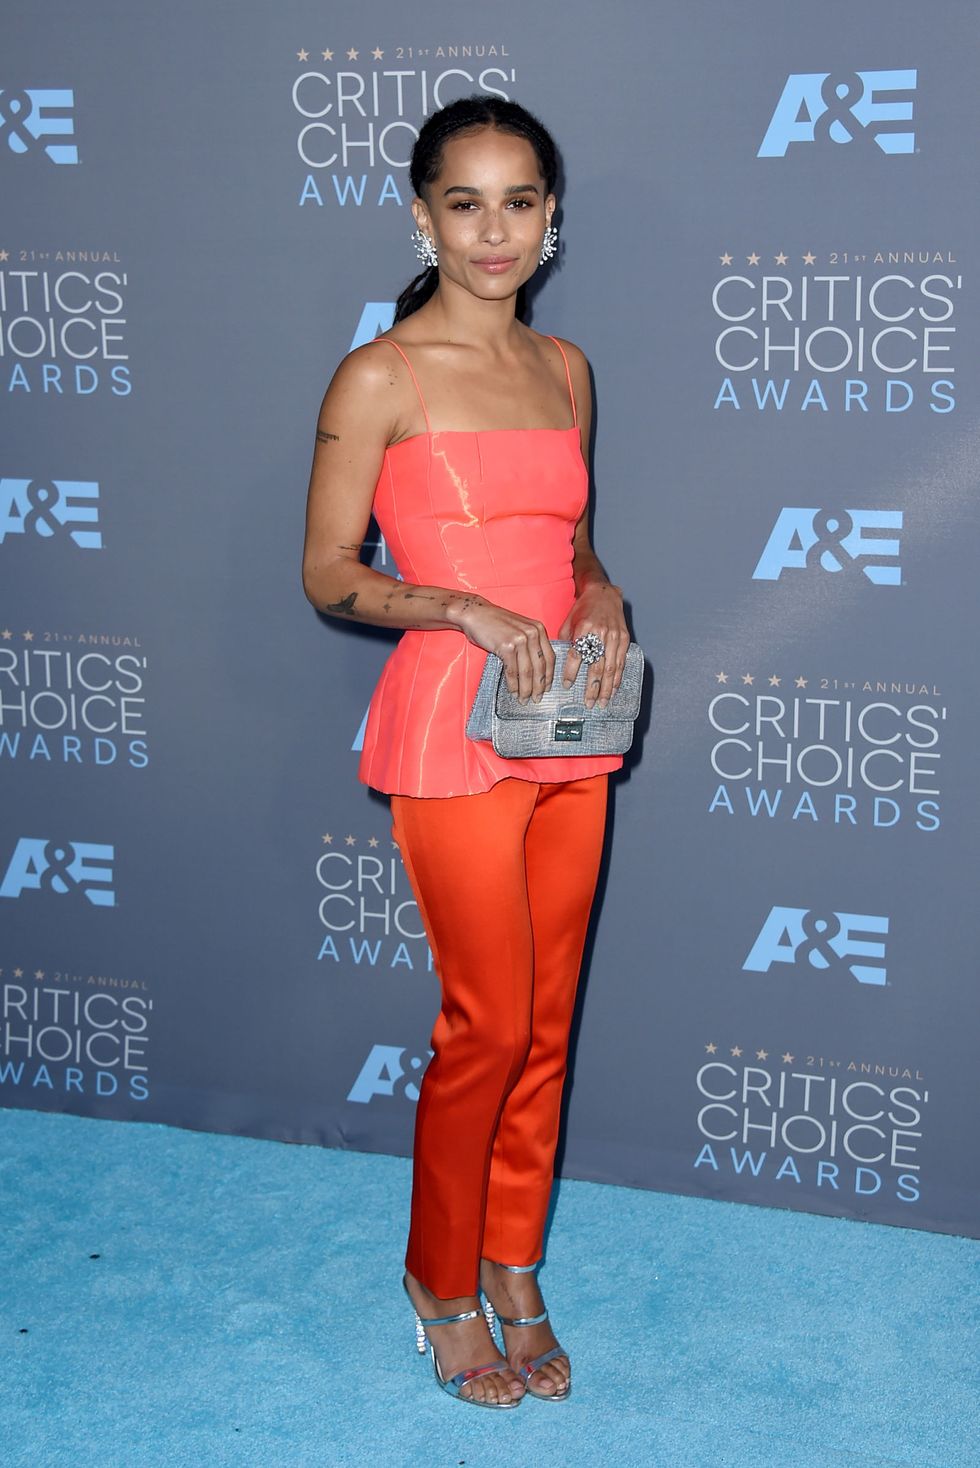 2016 Critics' Choice Awards: See the hottest looks from the red carpet